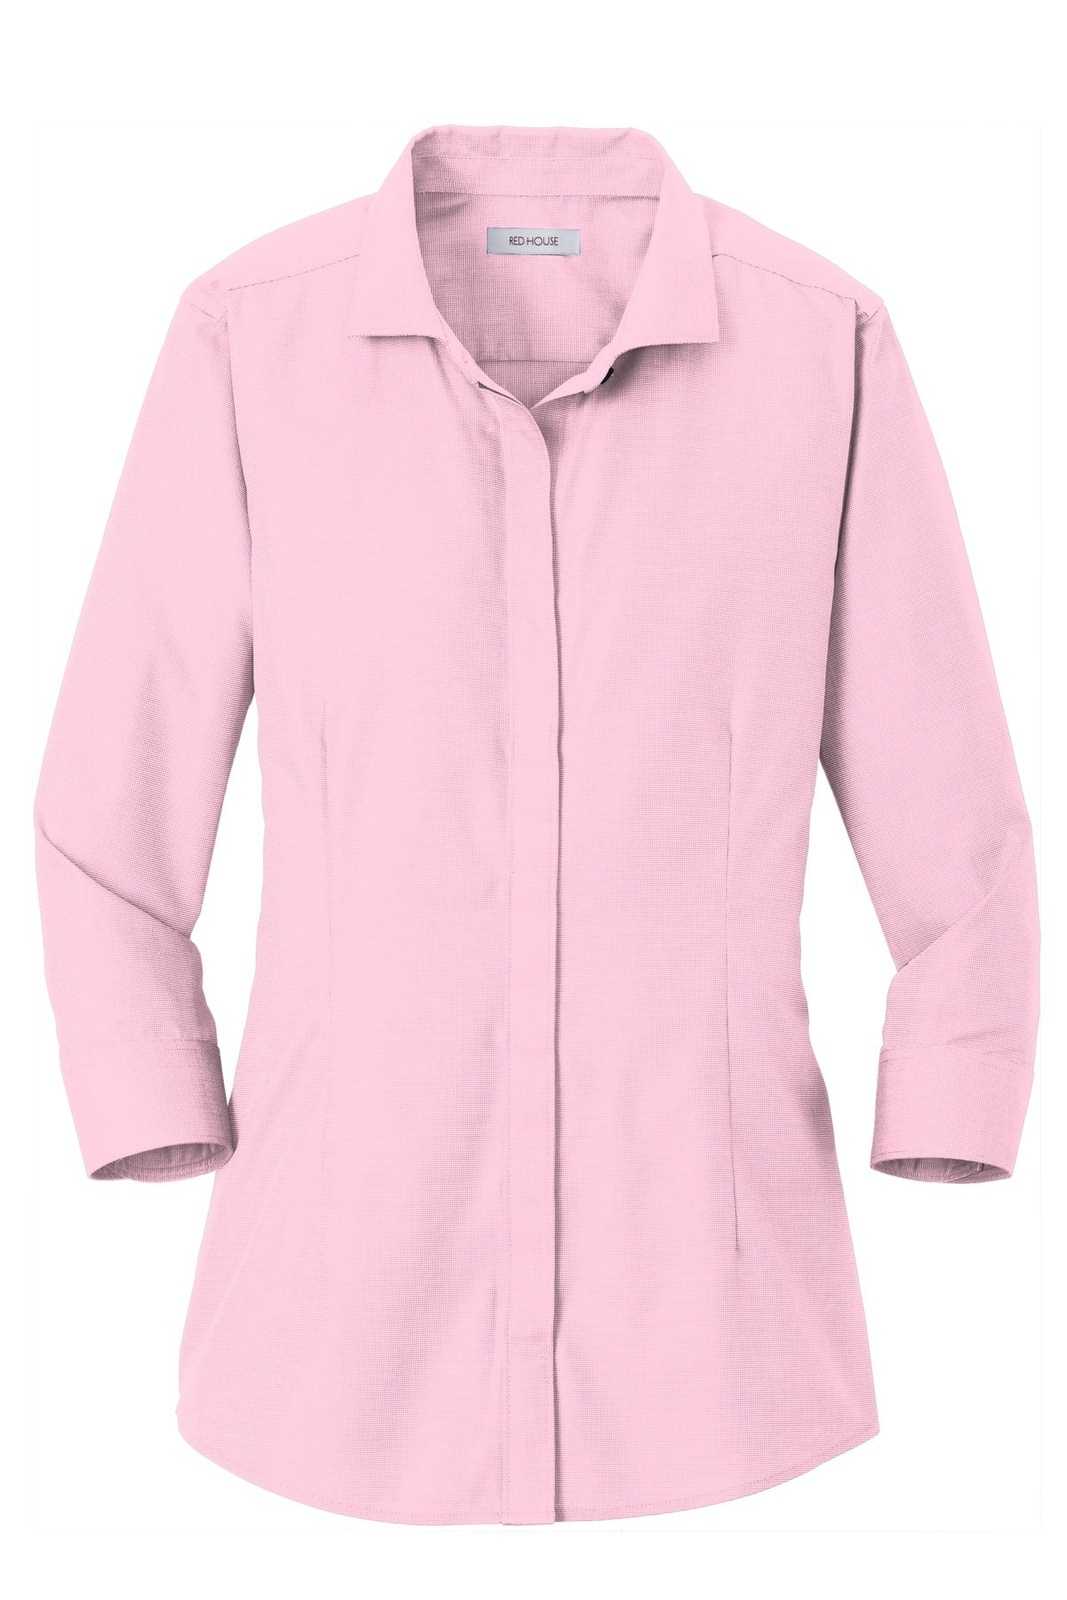 Red House RH690 Ladies 3/4-Sleeve Nailhead Non-Iron Shirt - Pink - HIT a Double - 5